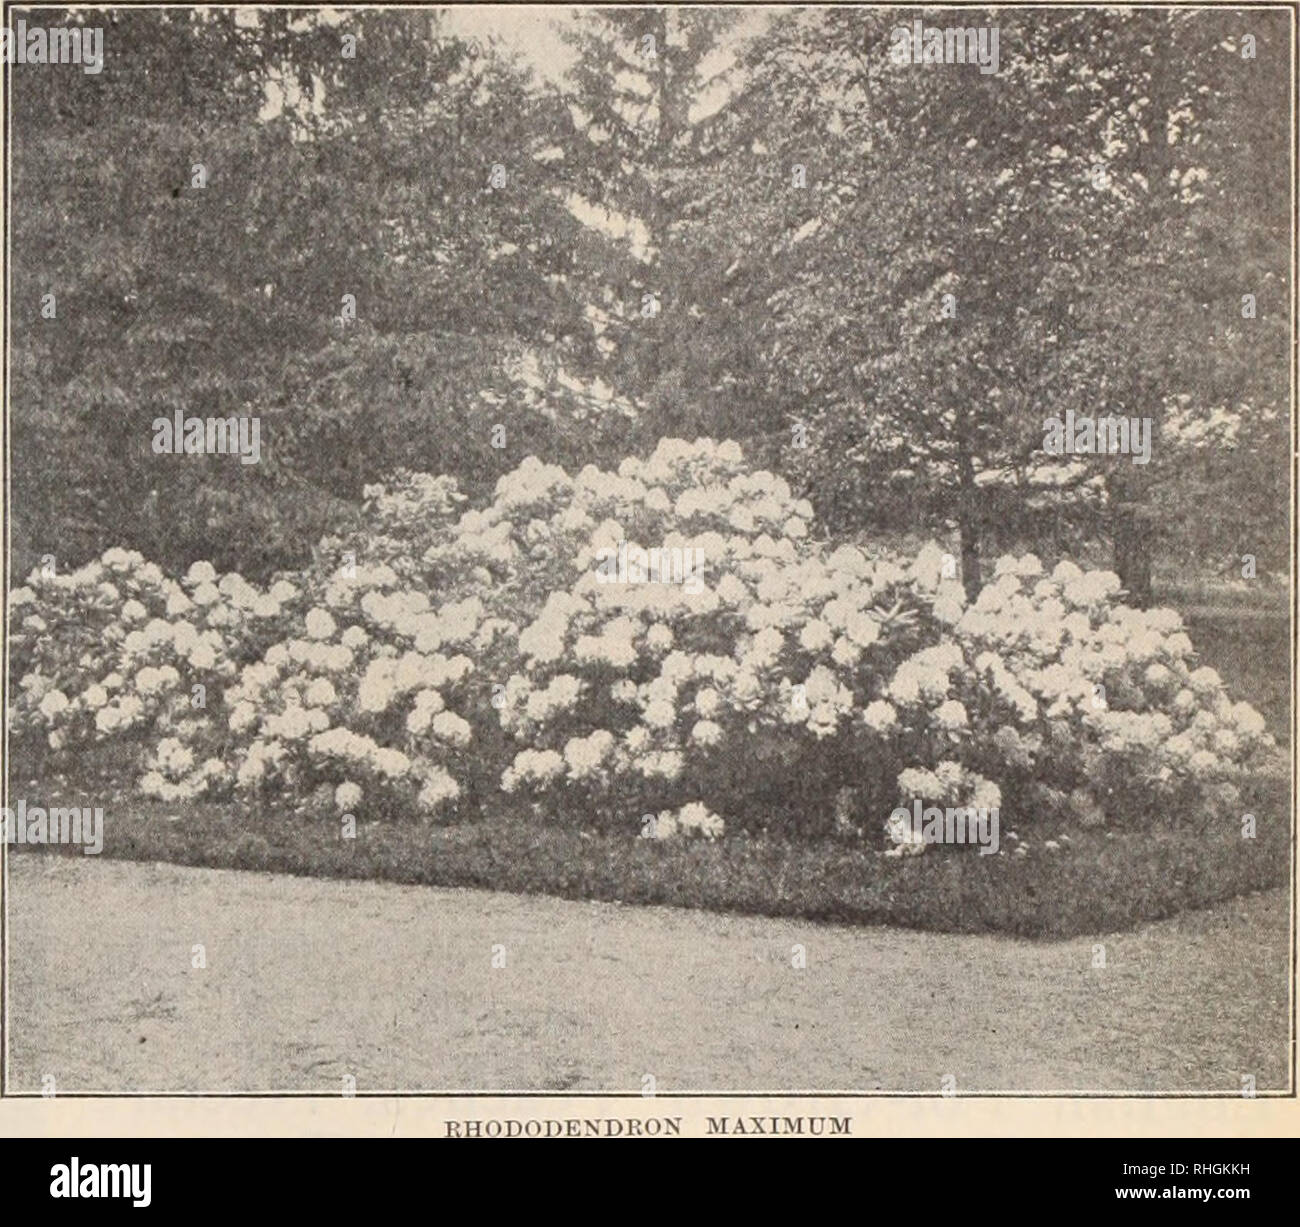 . Boddington's quality bulbs, seeds and plants / Arthur T. Boddington.. Nursery Catalogue. 27 Ko'diild^'o?; Rhododendron Maximum Rhododendron Tlie native Hliododeiidron indigenous to the Xortliera United States. Plants of this beautiful Rhododendton are most useful for quickly and Iiarmanently in'odueiiig fine landscape effects at a very low price. I offer carefully selected, well- rooted plants, collected in Sullivan County, New York, at $150.00 per ear, delivered F.O.B.'at any freight station within 1.50 miles of New York City. Tlie number of plants in a car-loiid depends upon the size of pl Stock Photo